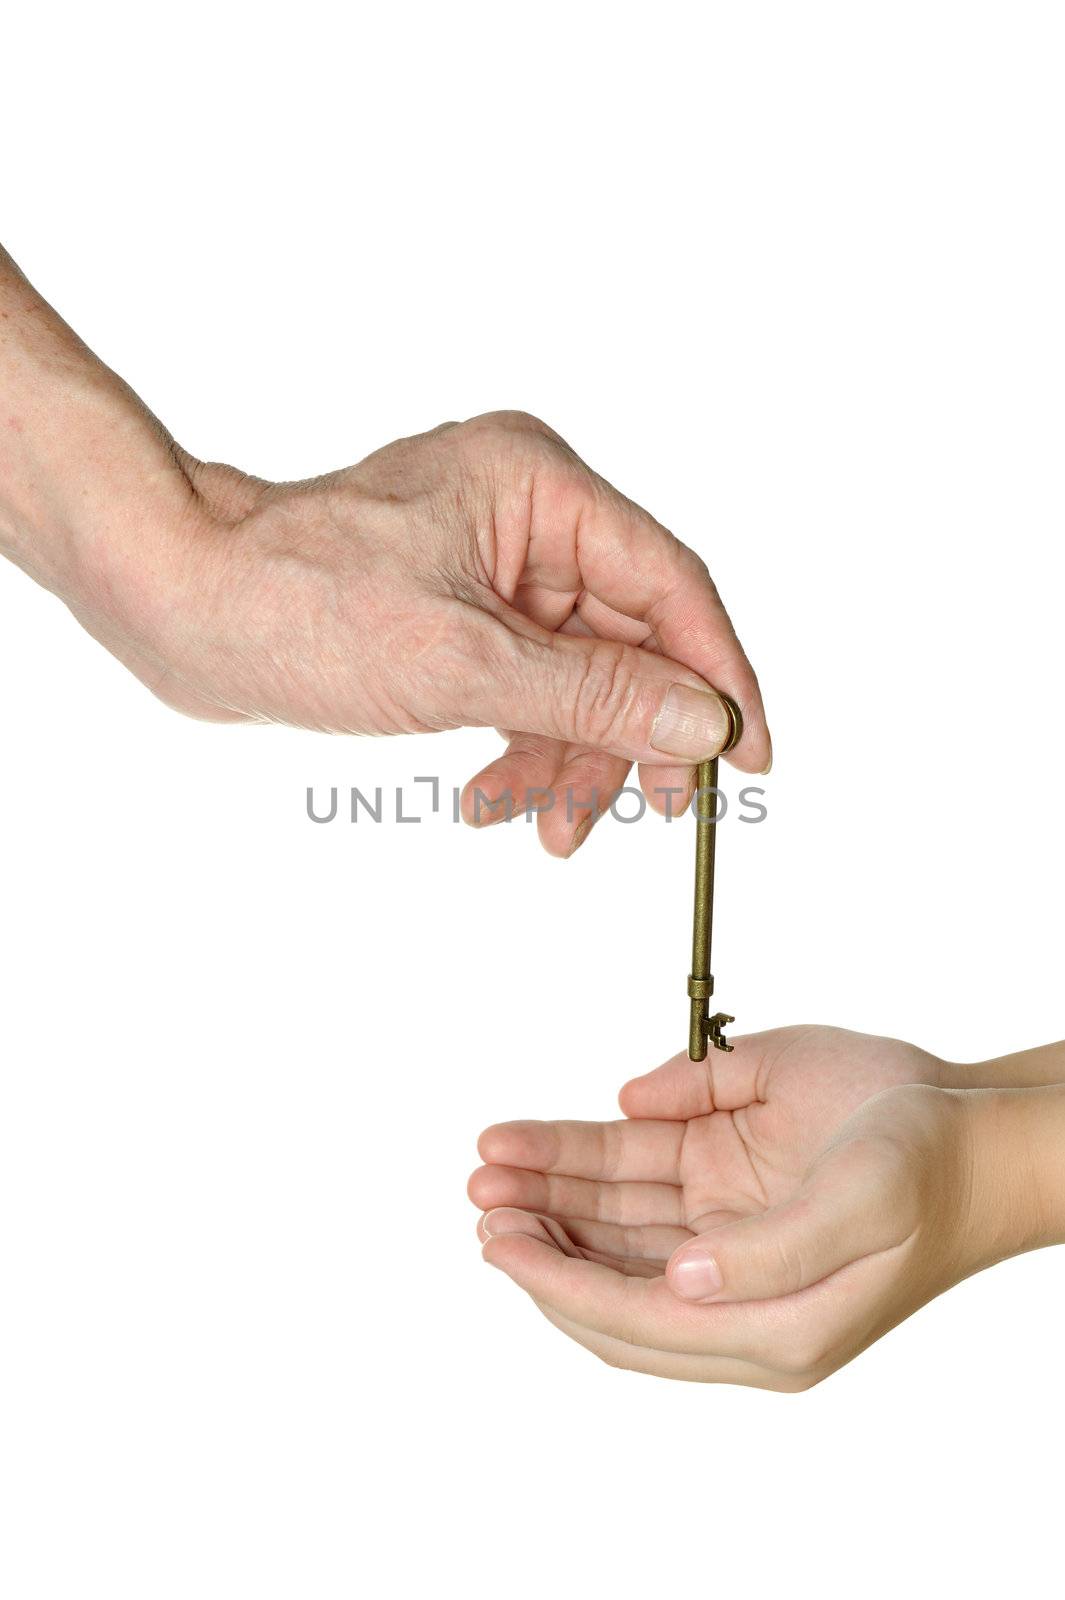 Two hands passing an old key isolated on white background